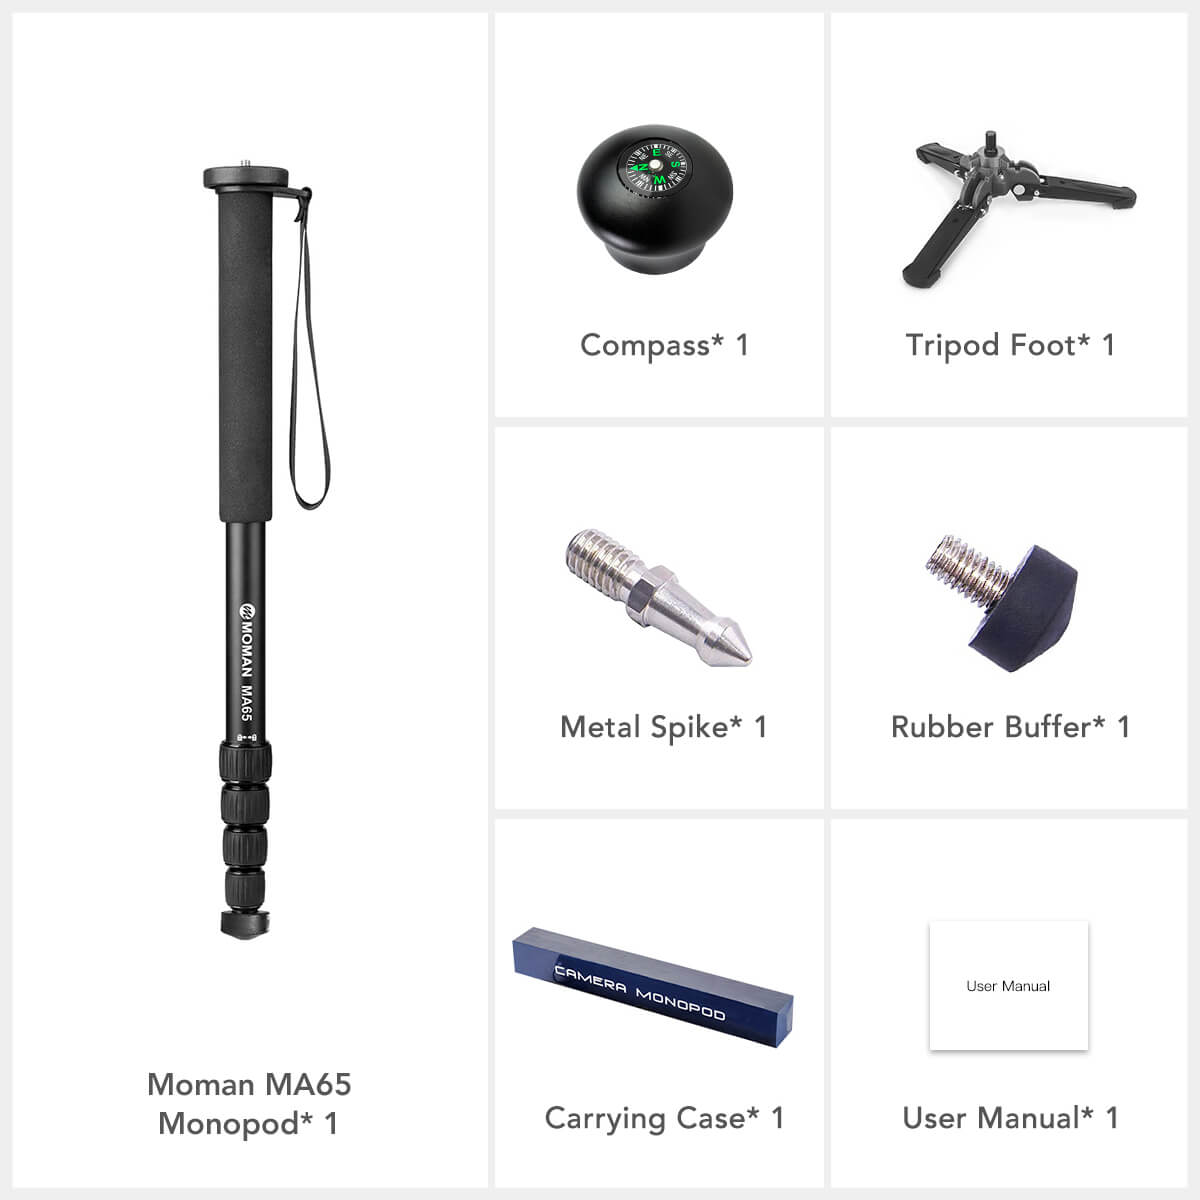 Package list of Moman MA65: Monopod, compass, tripod foot, carrying case, etc.